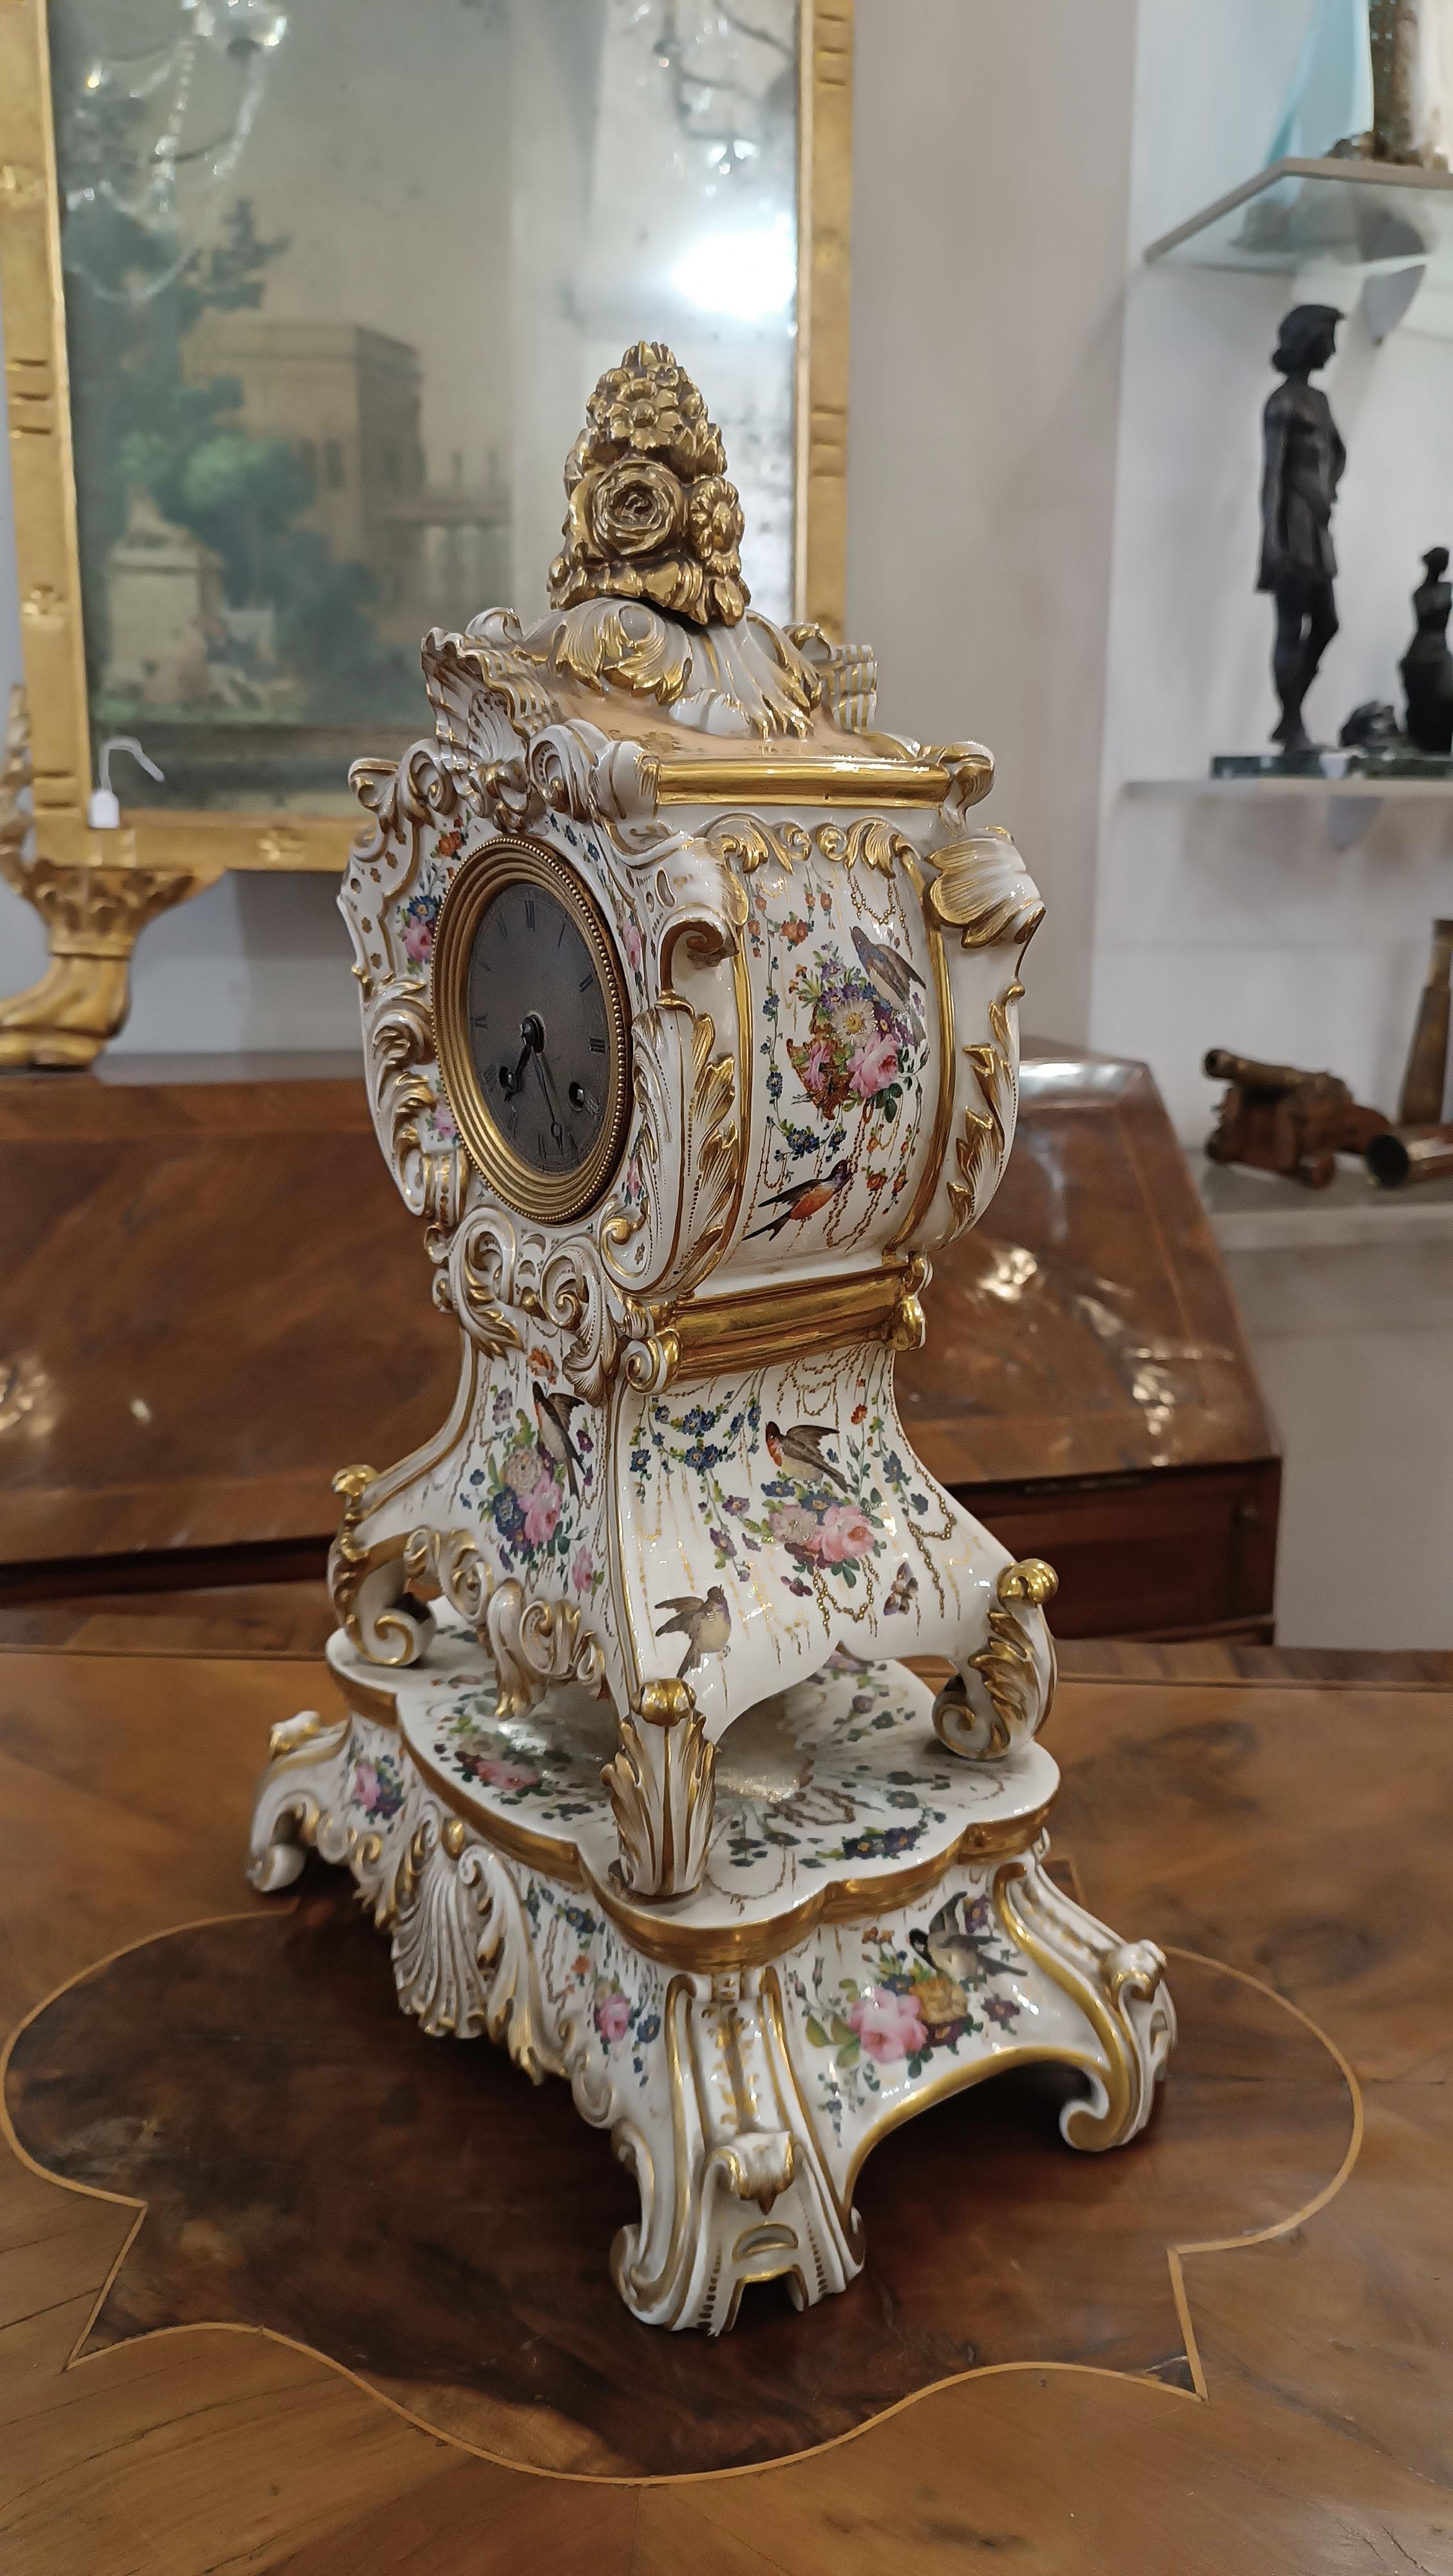 French EARLY 19th CENTURY “OLD PARIS” PORCELAIN CLOCK 